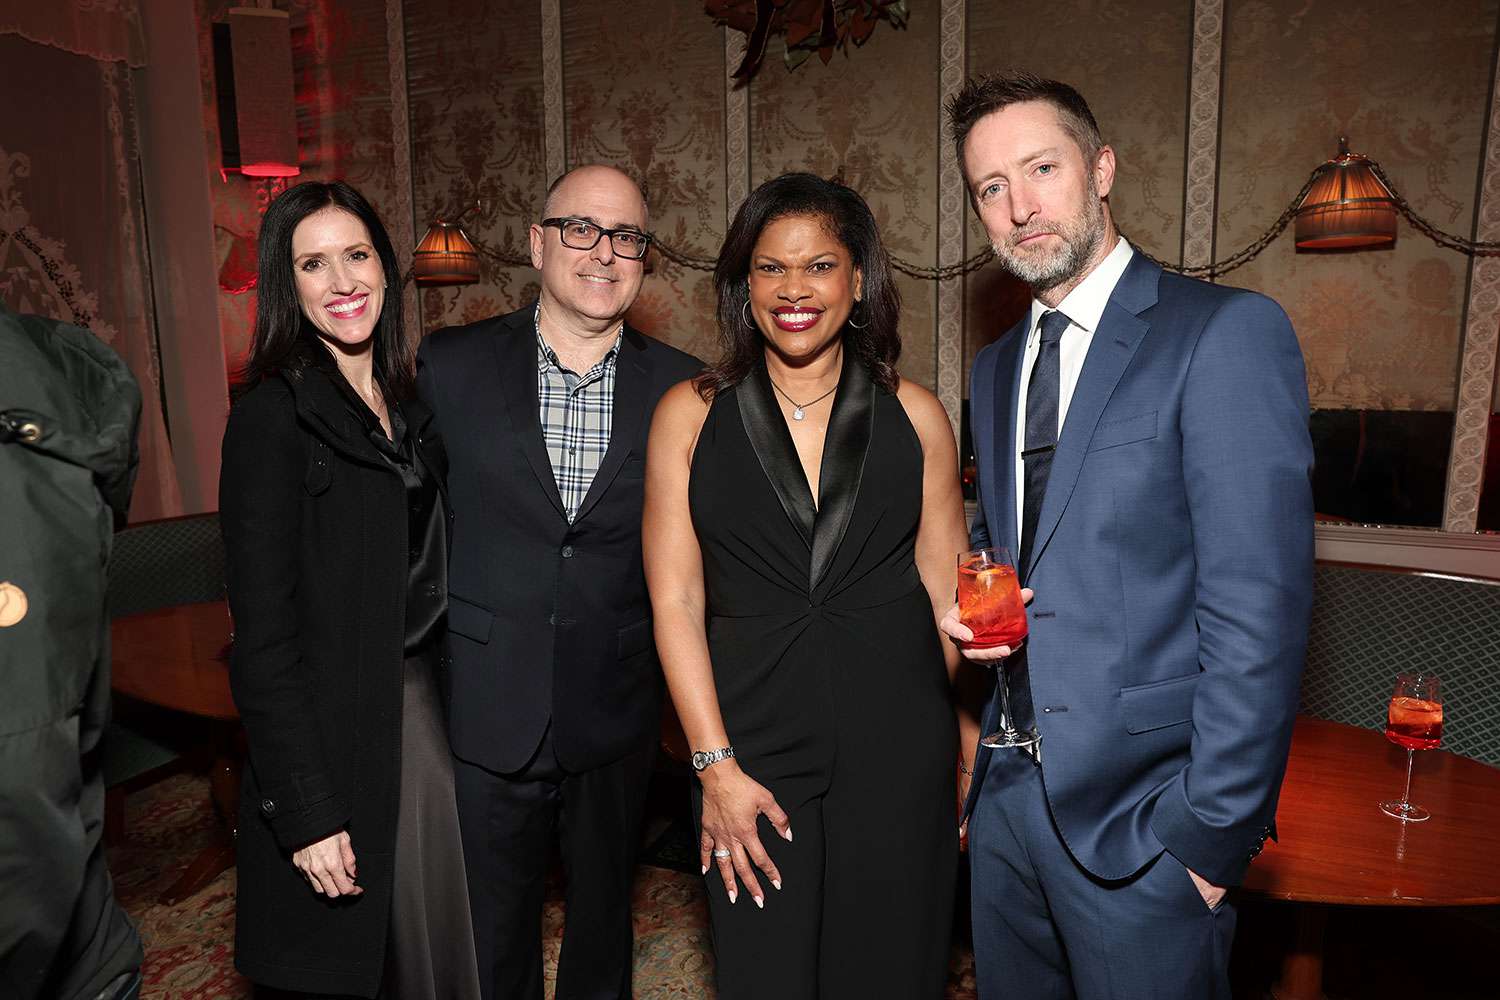 Screen Actors Guild Awards and Entertainment Weekly (EW) co-hosted the star-studded inaugural SAG Awards Season Celebration presented by City National Bank at the Chateau Marmont 